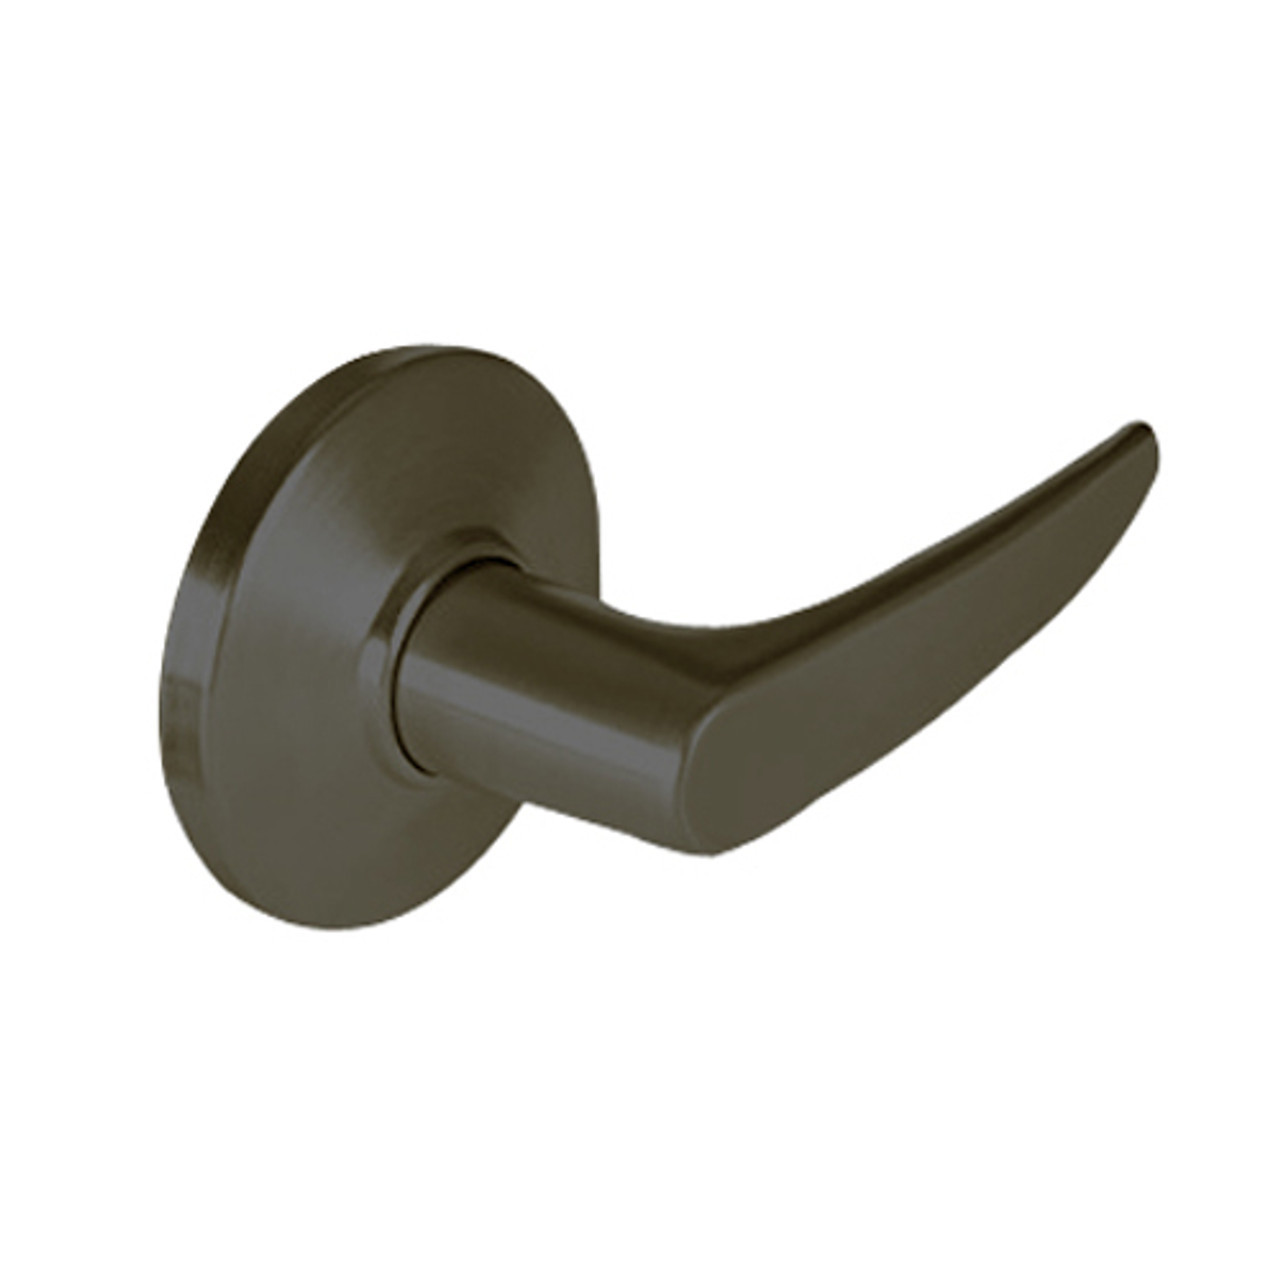 9K30M16DS3613LM Best 9K Series Communicating Heavy Duty Cylindrical Lever Locks with Curved Without Return Lever Design in Oil Rubbed Bronze